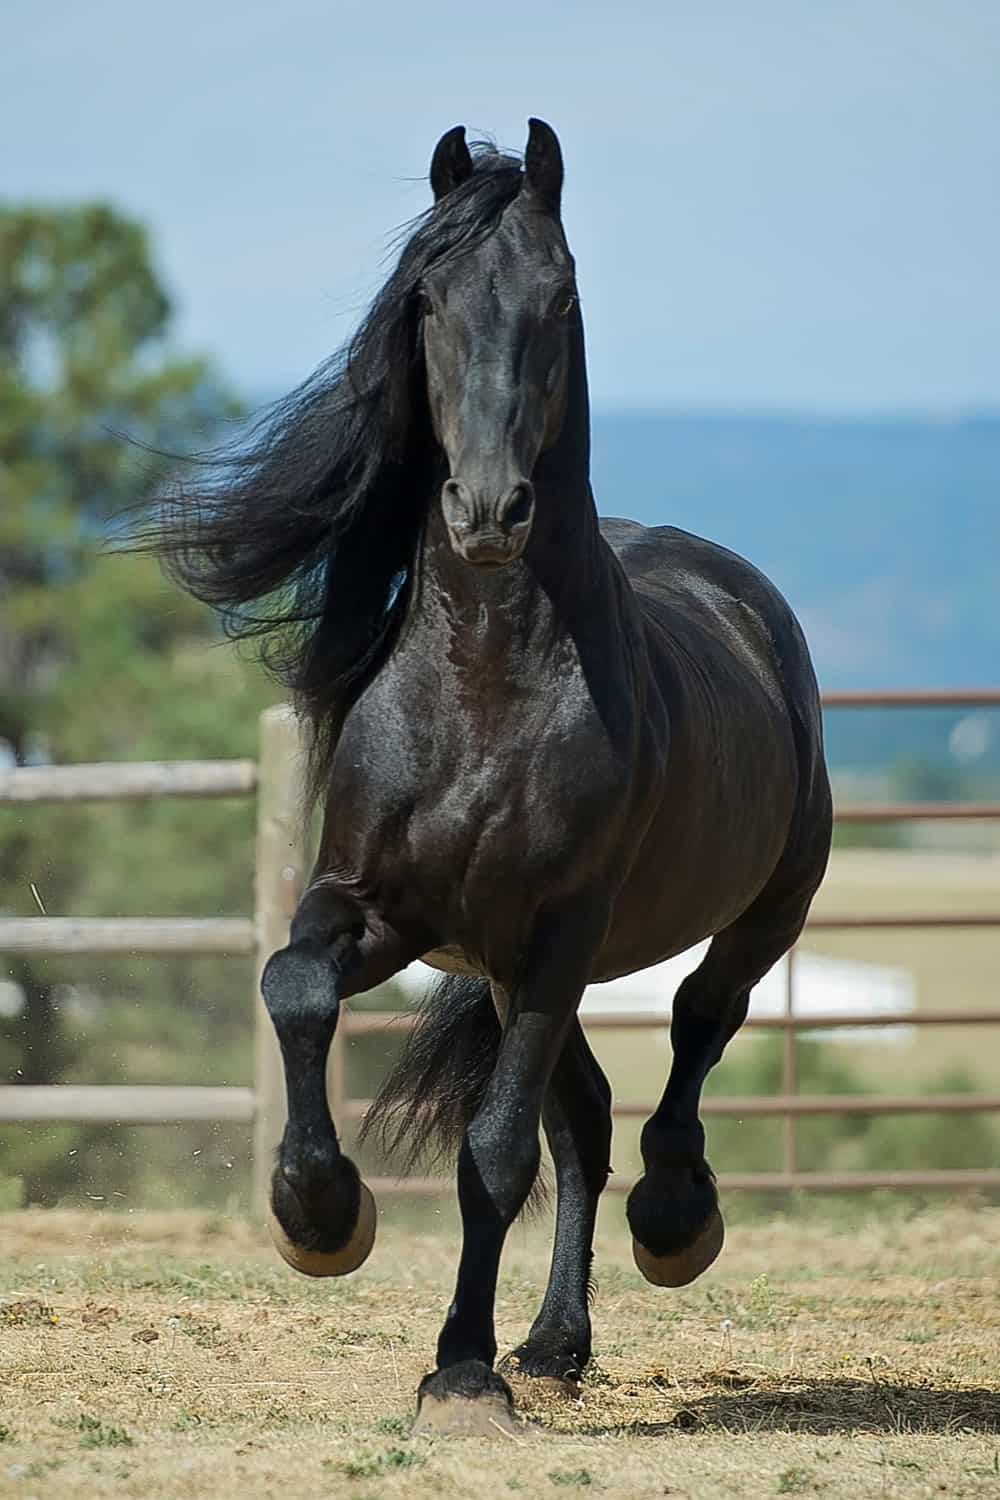 19 Most Popular Horse Breeds & Types of Horses